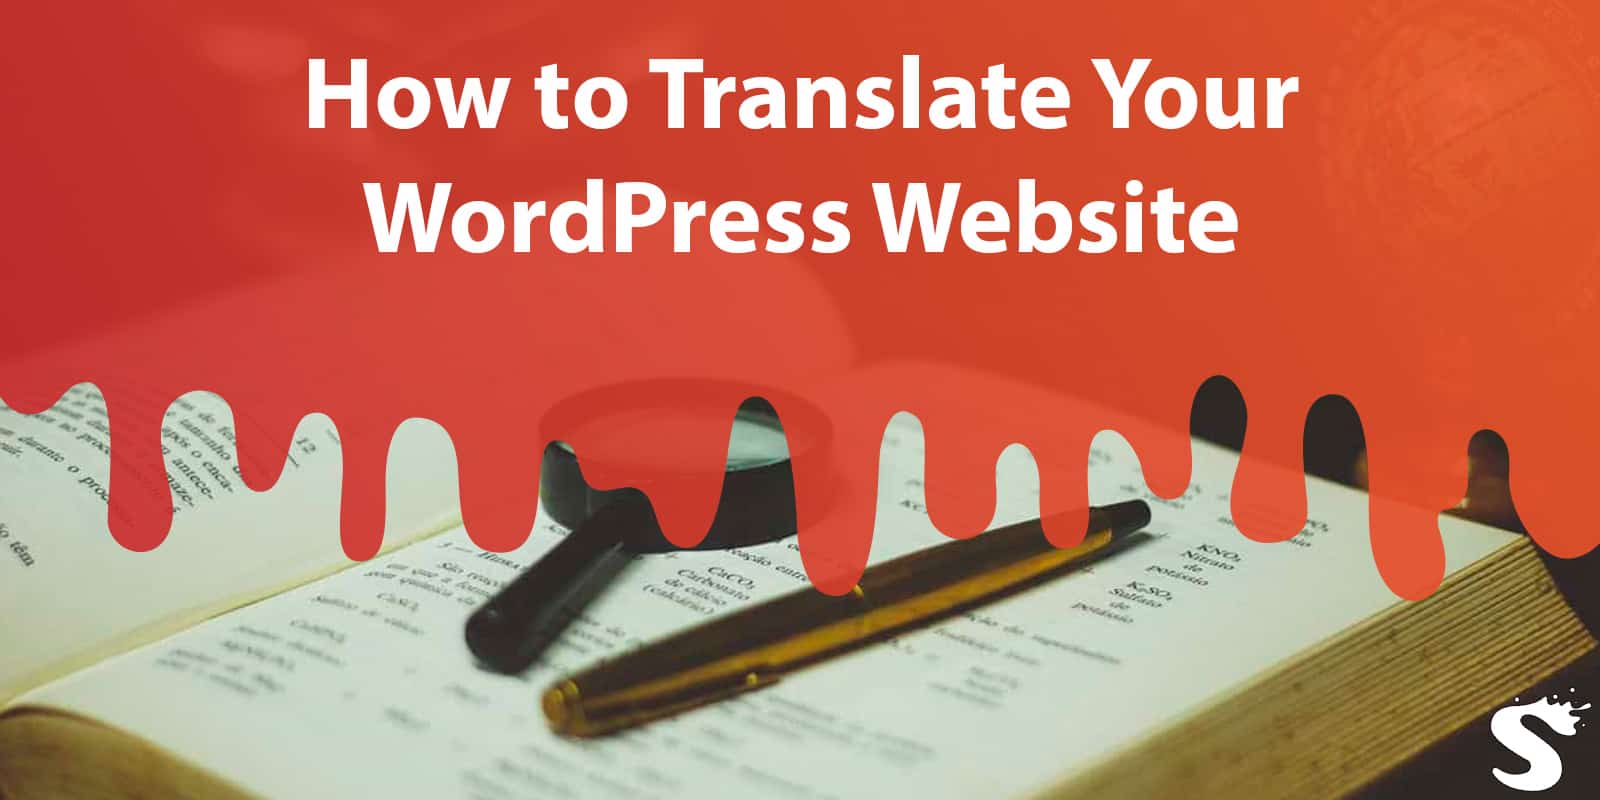 How to Translate Your WordPress Website in 2019